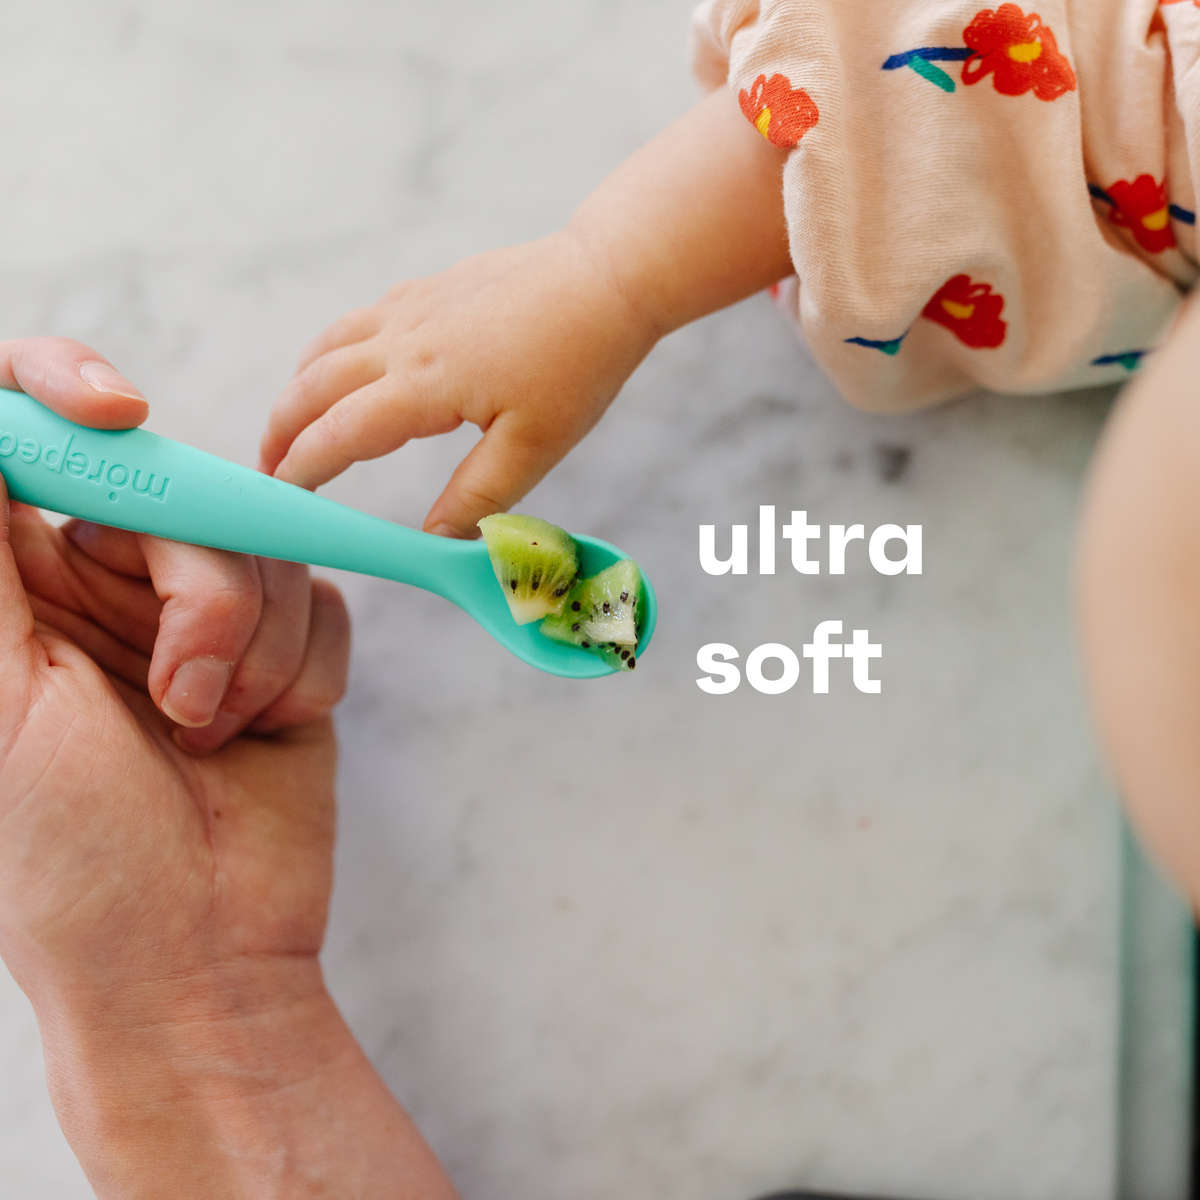 Baby Spoon Made of Silicone, Baby Spoon 4-piece Spoon, Silicone Spoon Baby  Soft, Feeding Spoon Baby BPA Free, Baby Porridge Spoon Long, for Babies and  Toddlers From 4 Months 